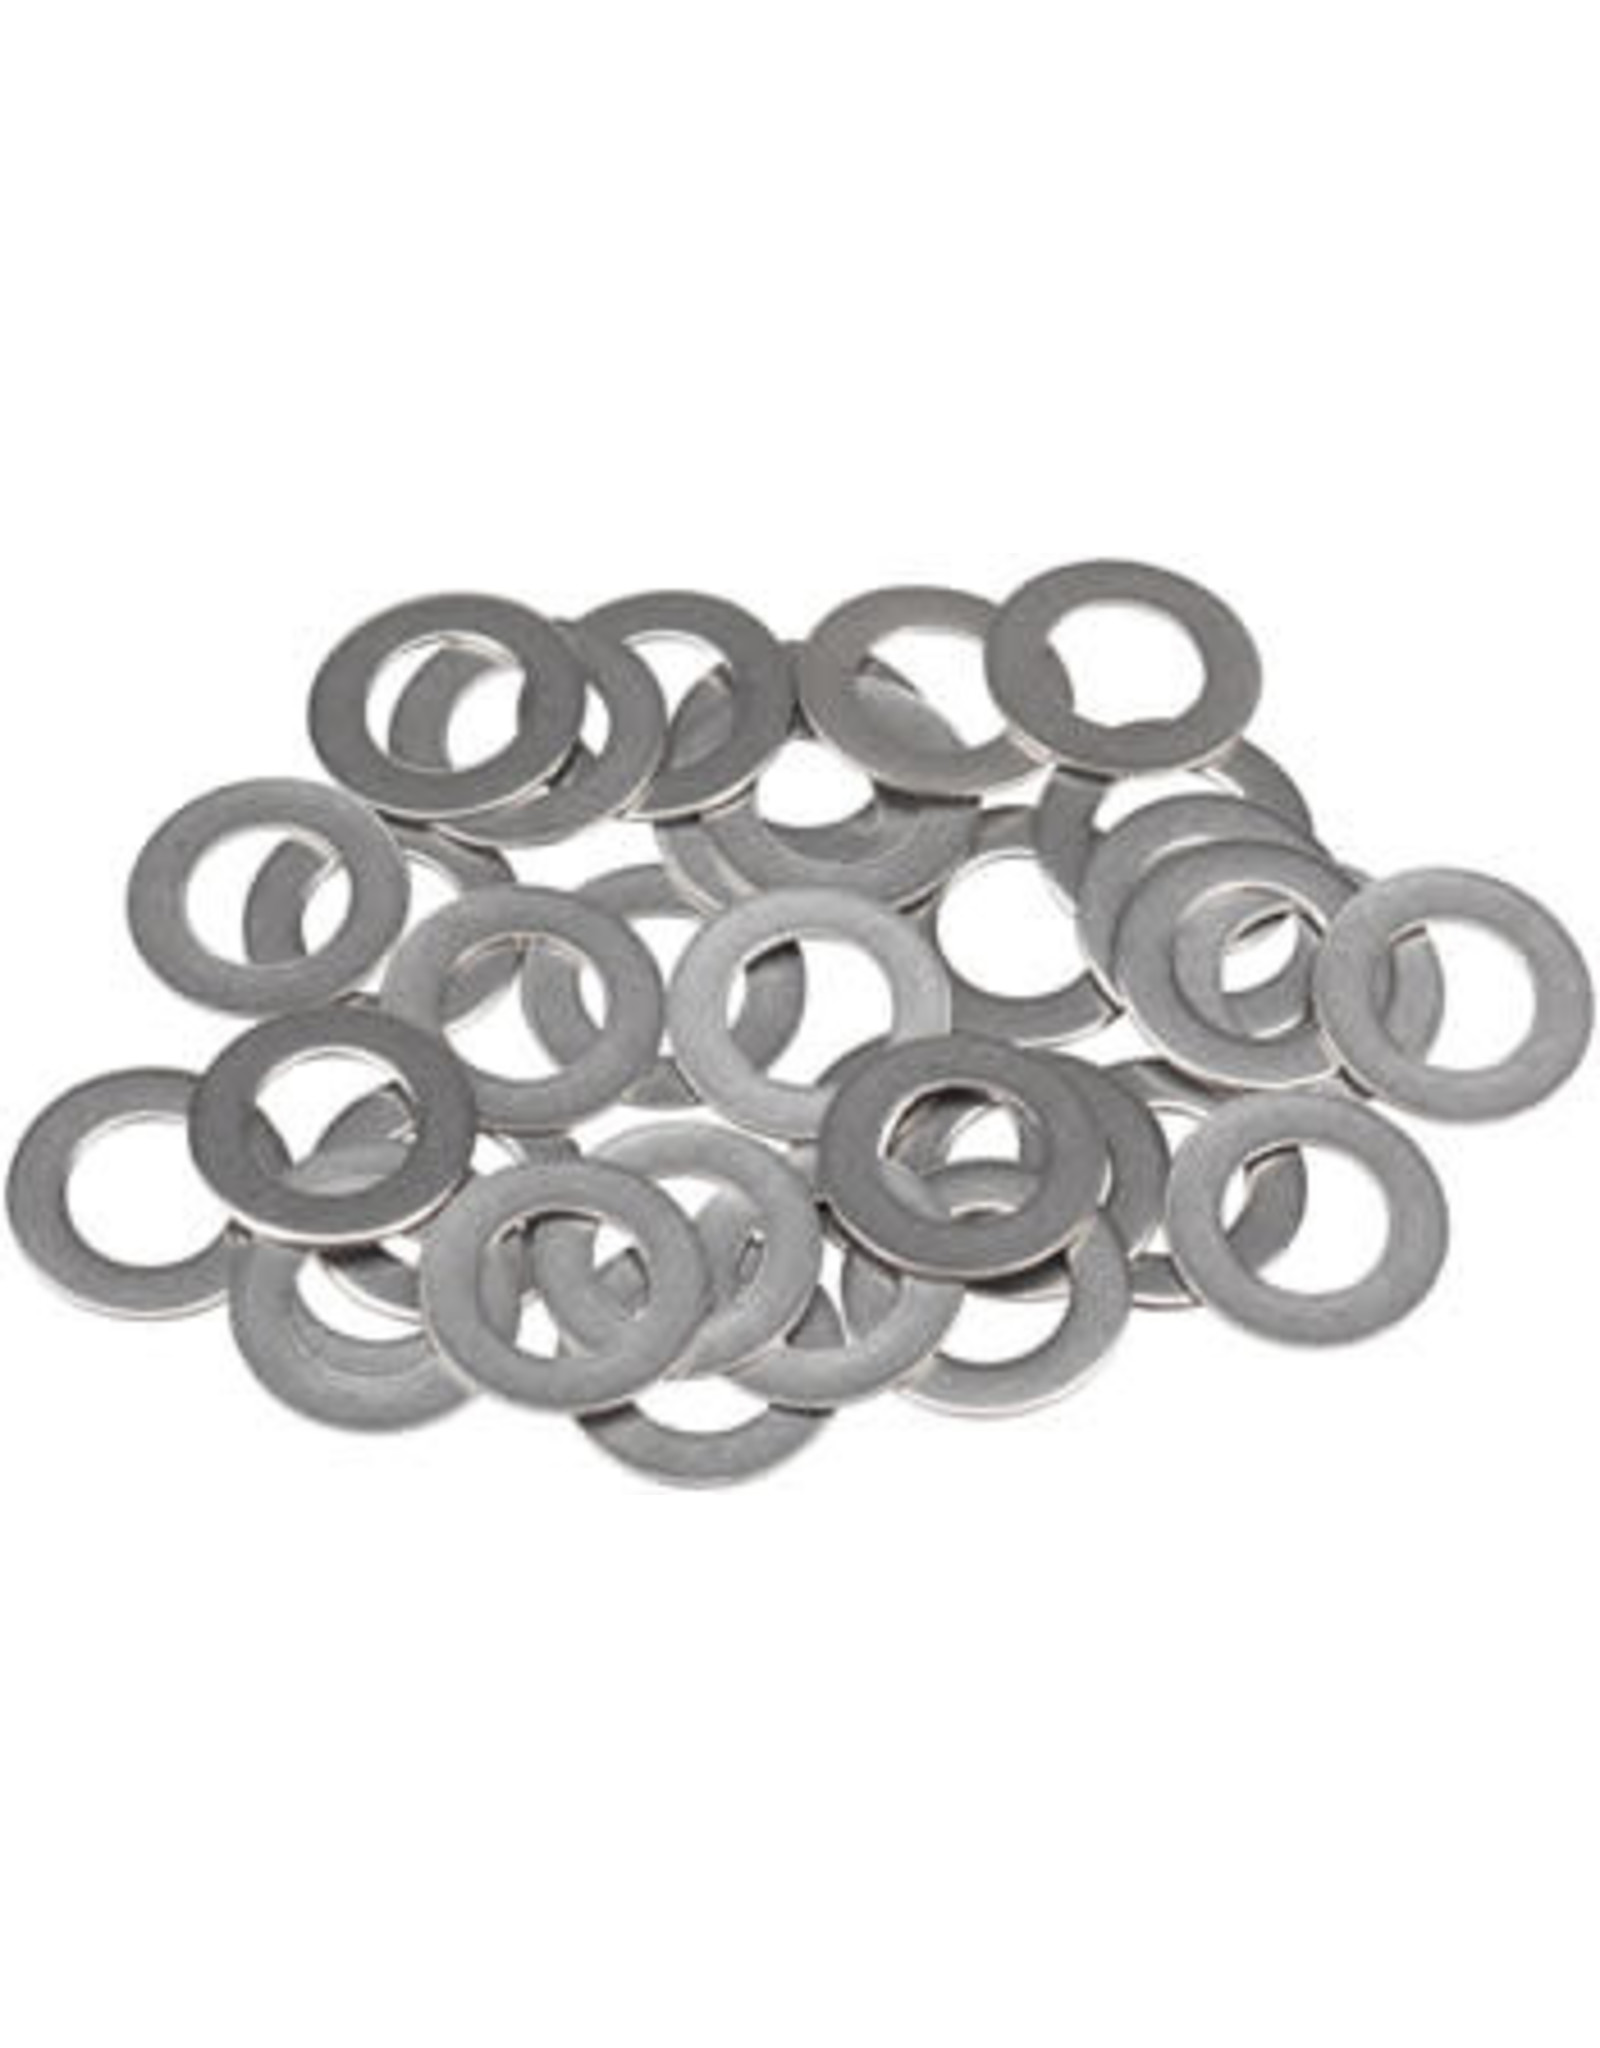 Whisky Parts Co. Whisky Stainless Spoke Nipple Washers, Bag of 34